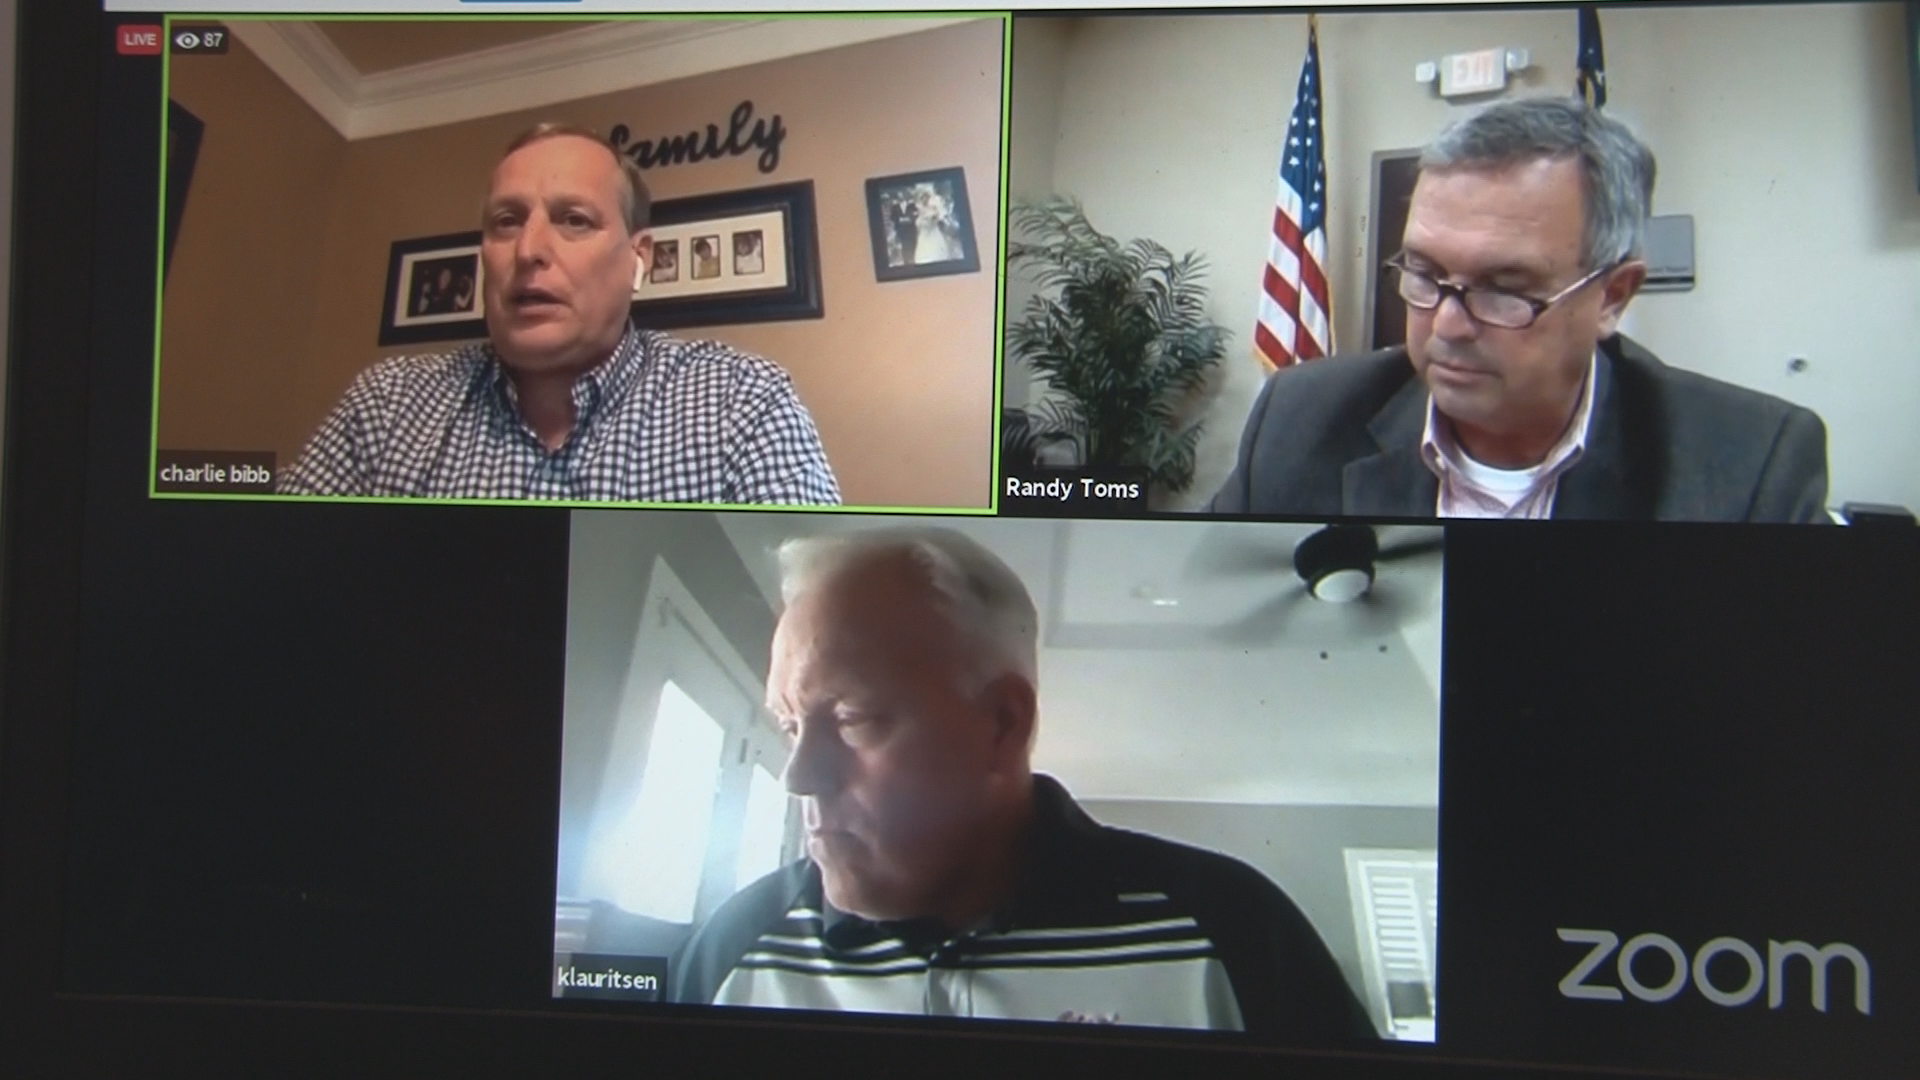 Council members shared their concerns during a virtual meeting.